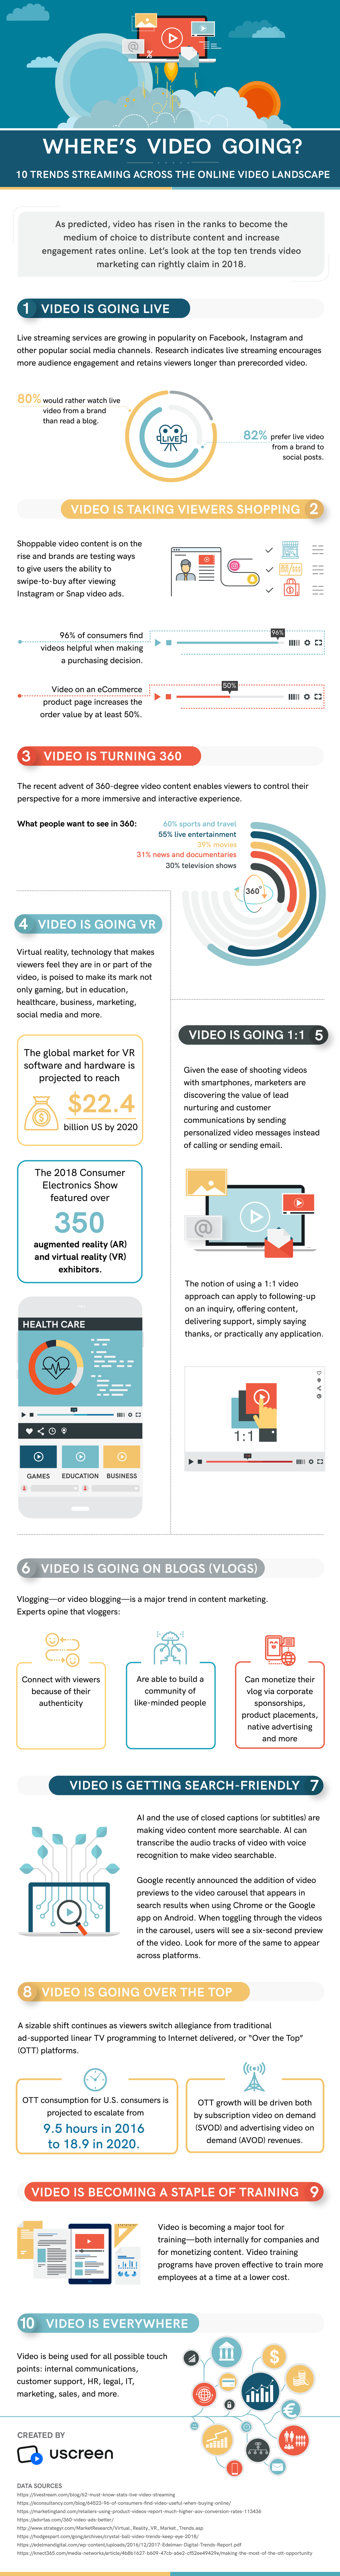 Video-infographic-trends-2019